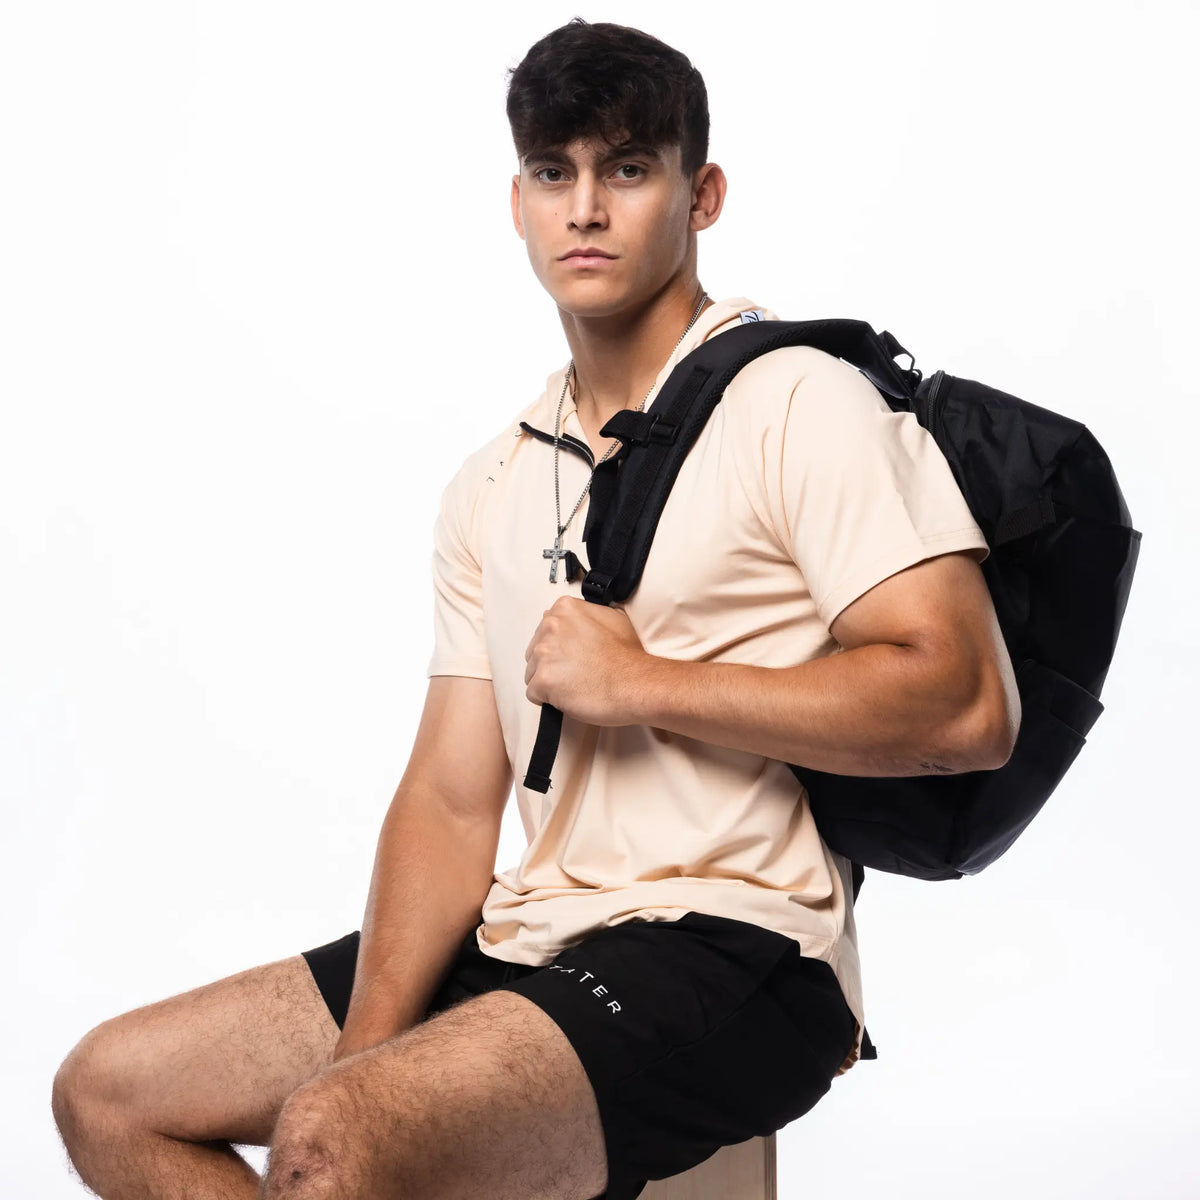 In the image, there is a young man wearing a tan short-sleeved hoodie and black athletic shorts, both featuring the &quot;TATER&quot; logo, which suggests they are part of a baseball athletic wear line. He is also carrying a black backpack over one shoulder and has a set of earphones around his neck. His attire and accessories indicate a casual, sporty aesthetic, likely targeting athletes or individuals with an active lifestyle.